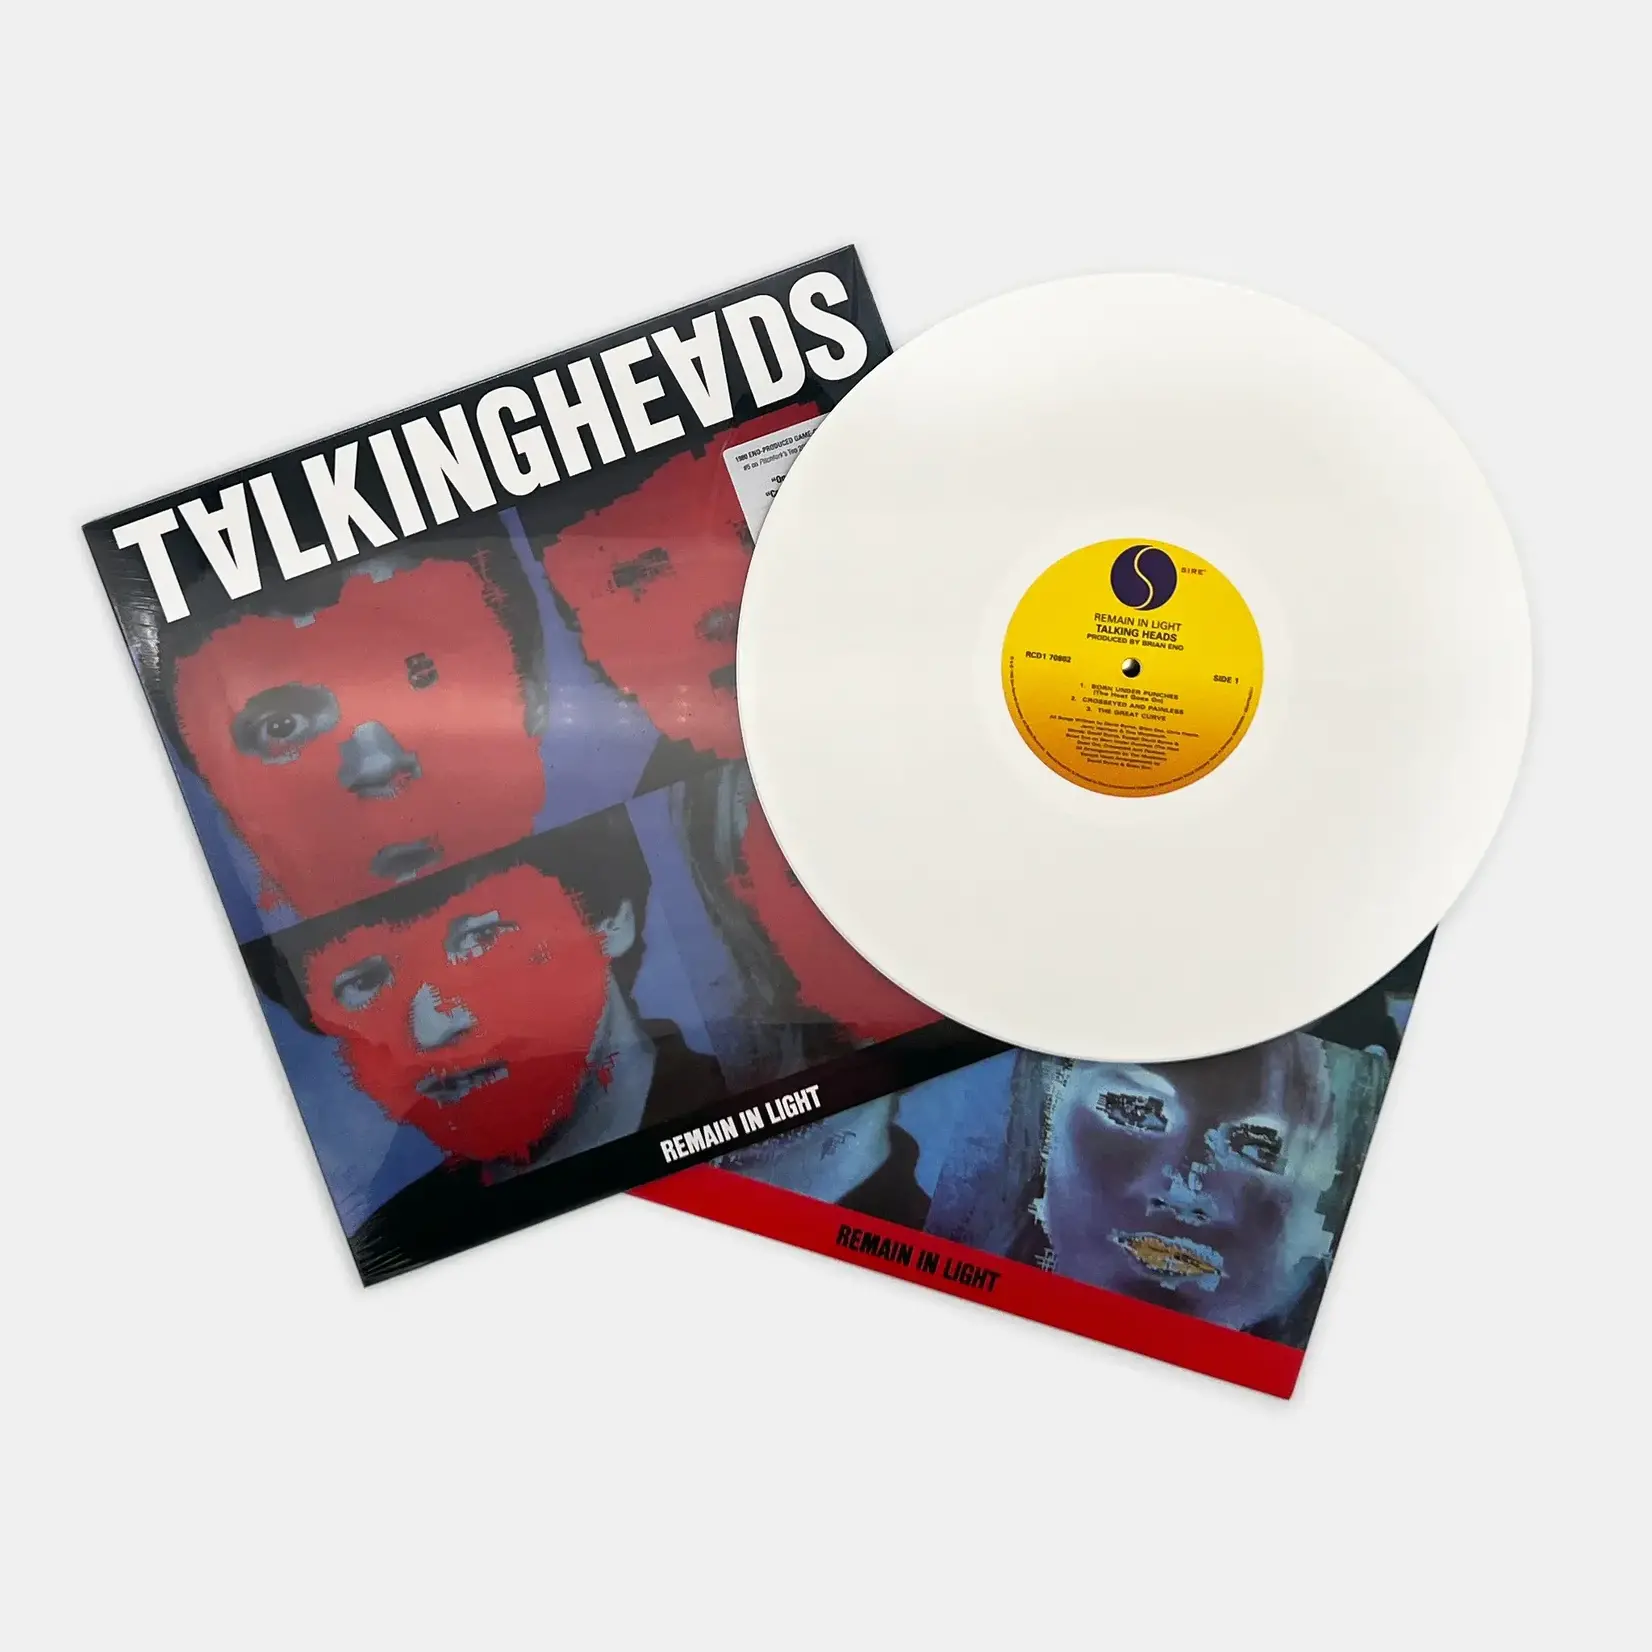 [New] Talking Heads - Remain In Light (solid white vinyl, indie exclusive)